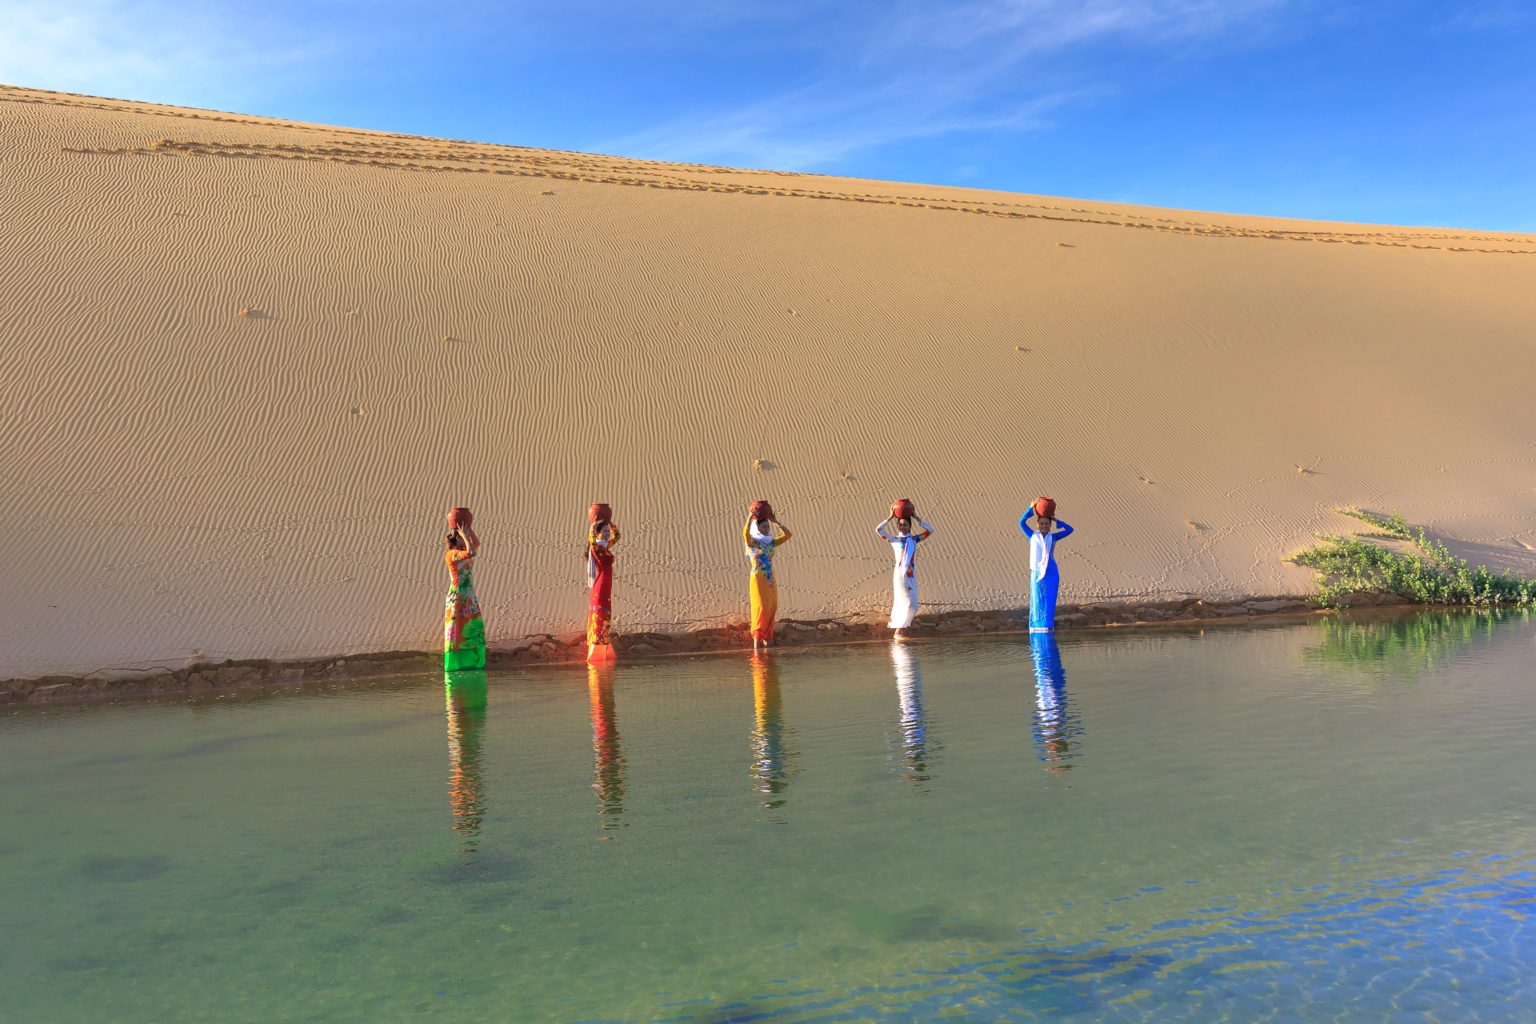 A color photo of five women in brightly colored dresses carrying jugs of water on their heads. A sand dune is in the background while an oasis of water is in the foreground, with the women standing at the edge of the water.